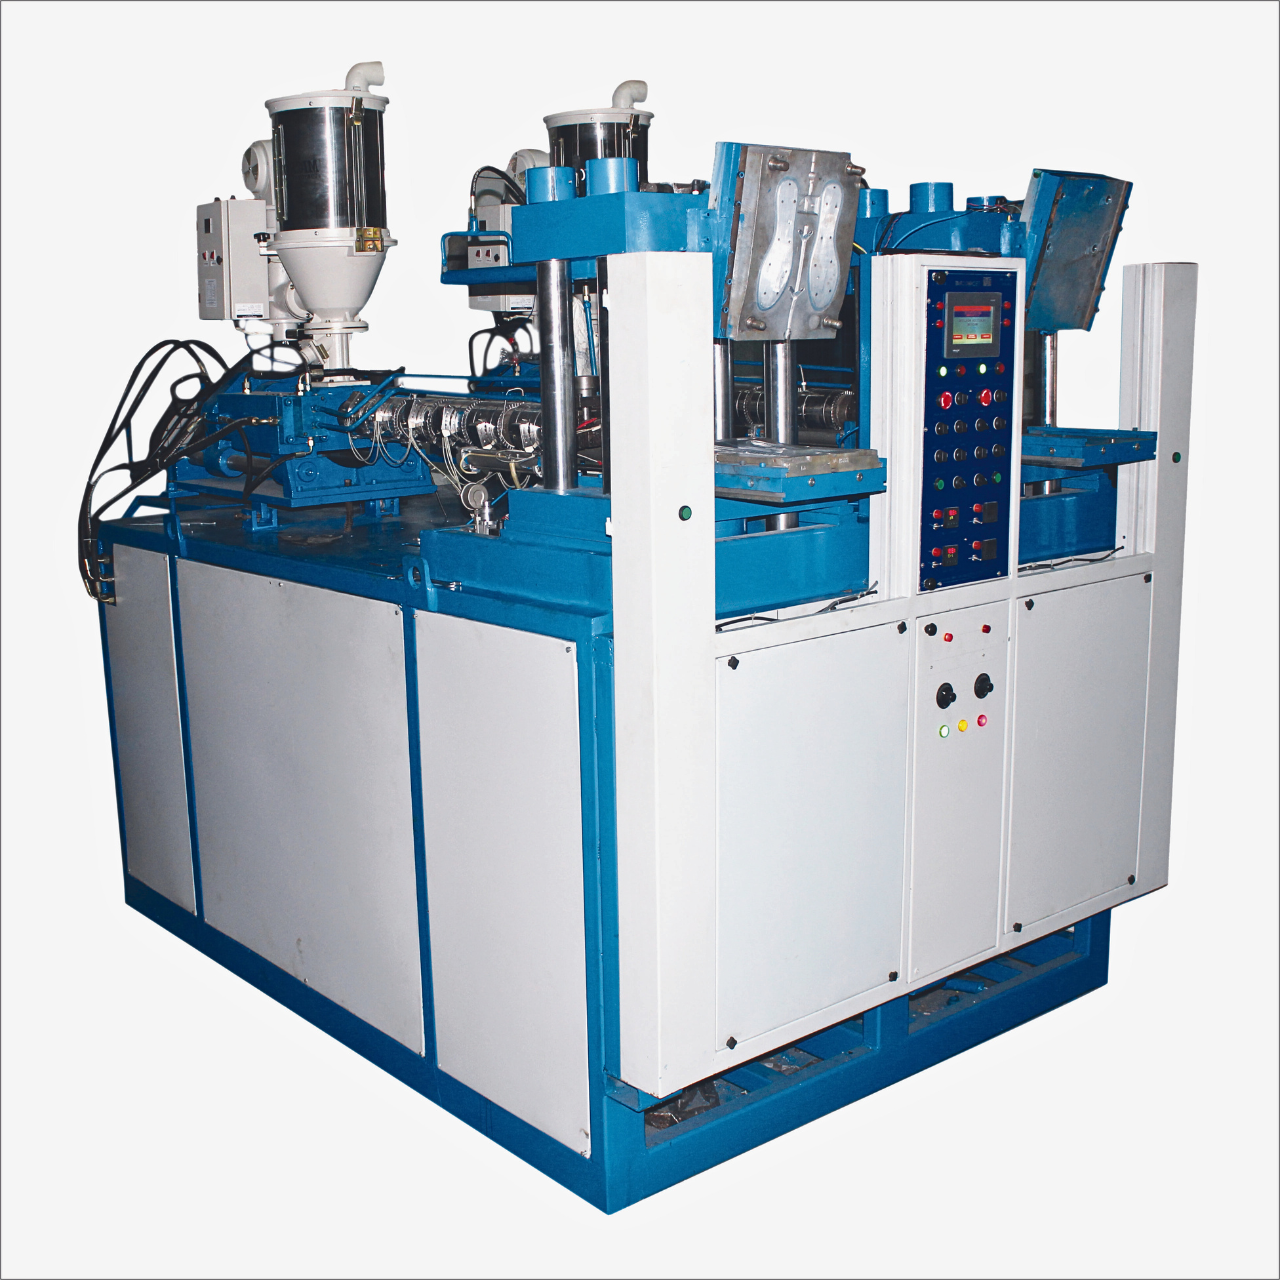 A screw piston type injection sole making machine from Techinj, used in manufacturing processes for footwear sole production.